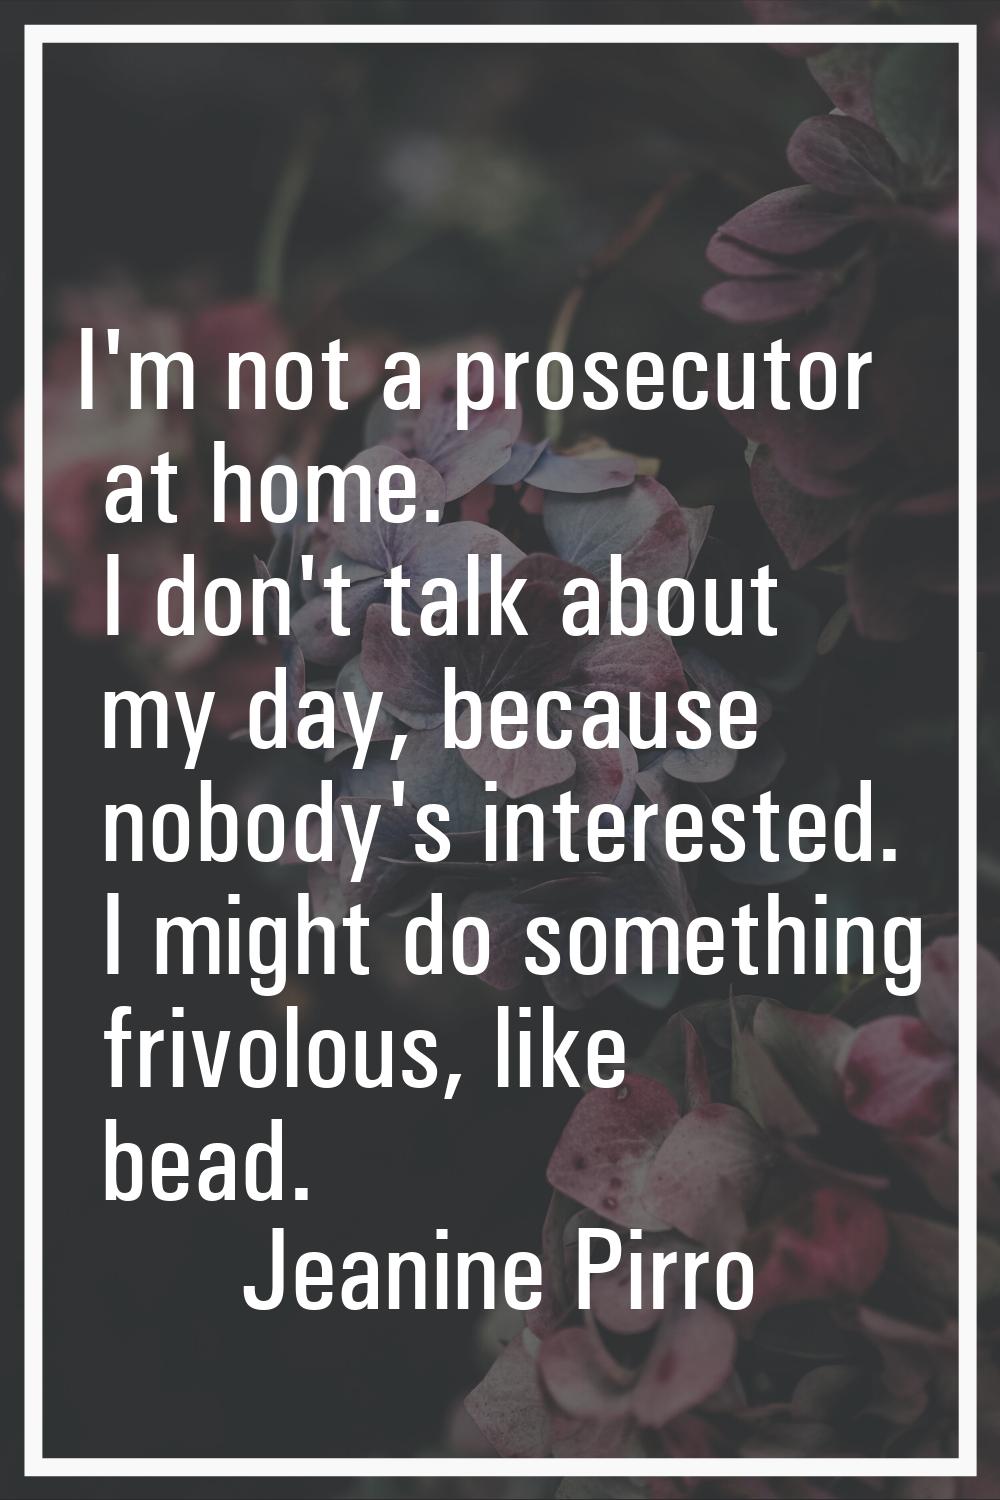 I'm not a prosecutor at home. I don't talk about my day, because nobody's interested. I might do so